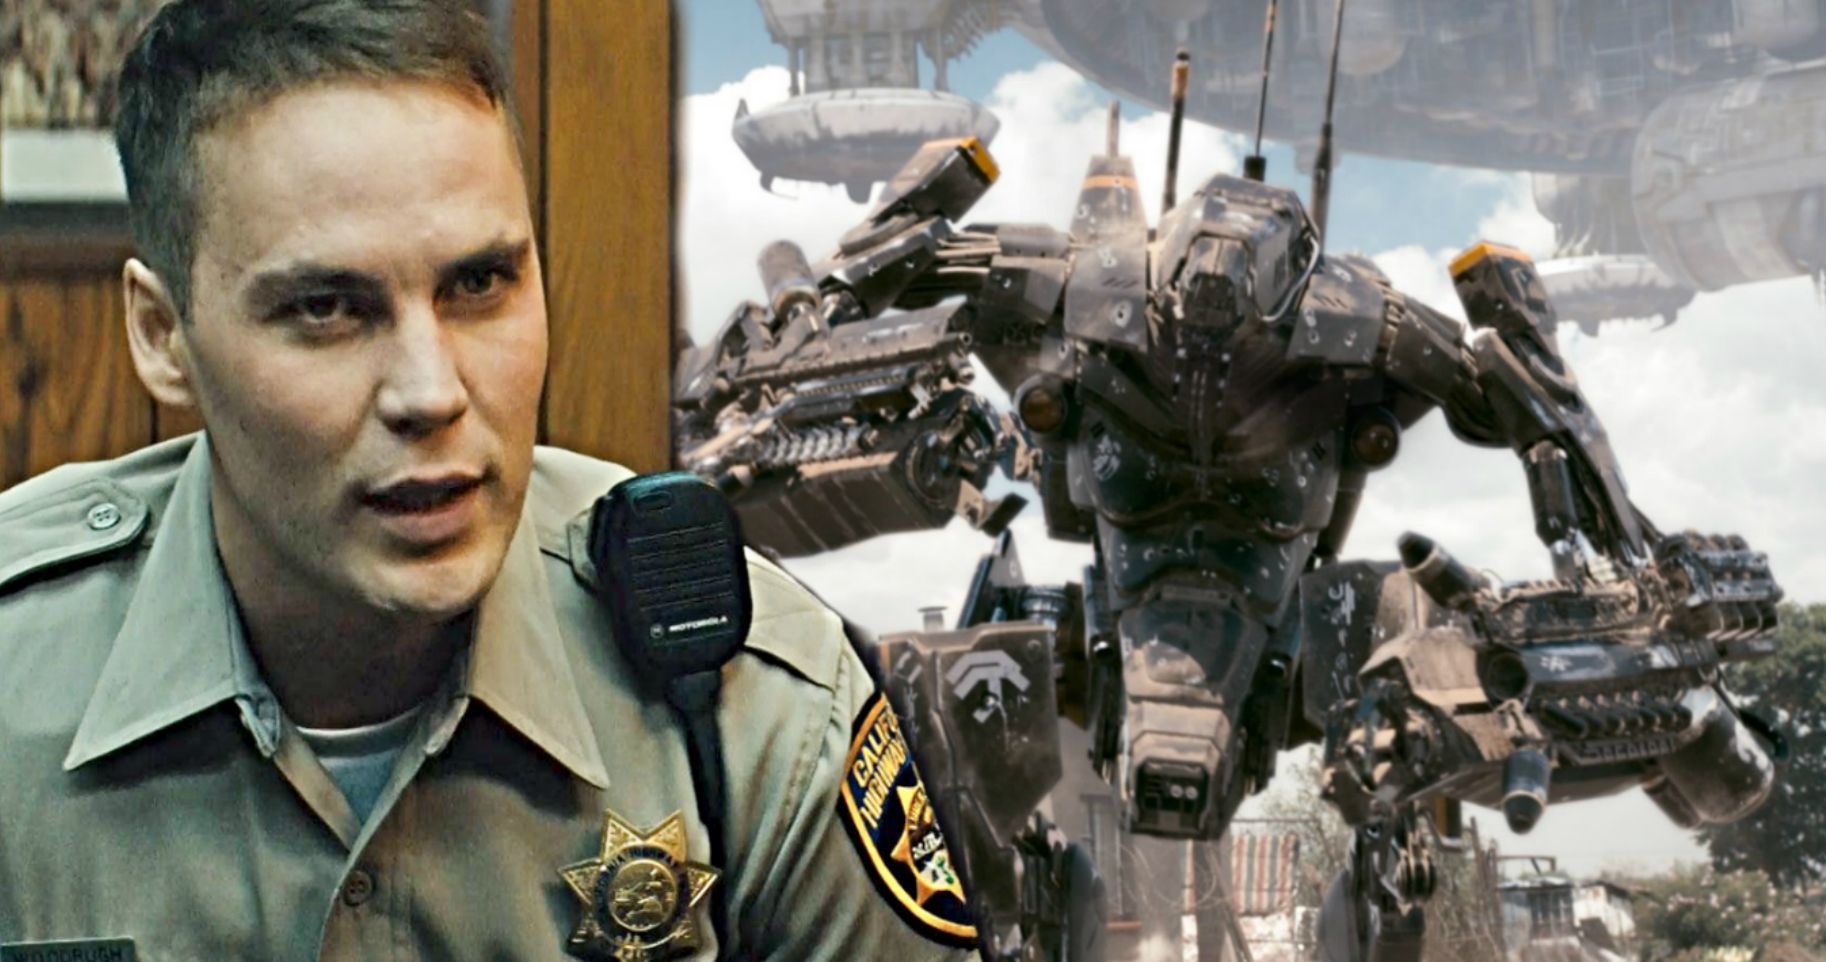 Taylor Kitsch Takes on Sci-Fi Thriller Inferno from District 9 Director Neill Blomkamp